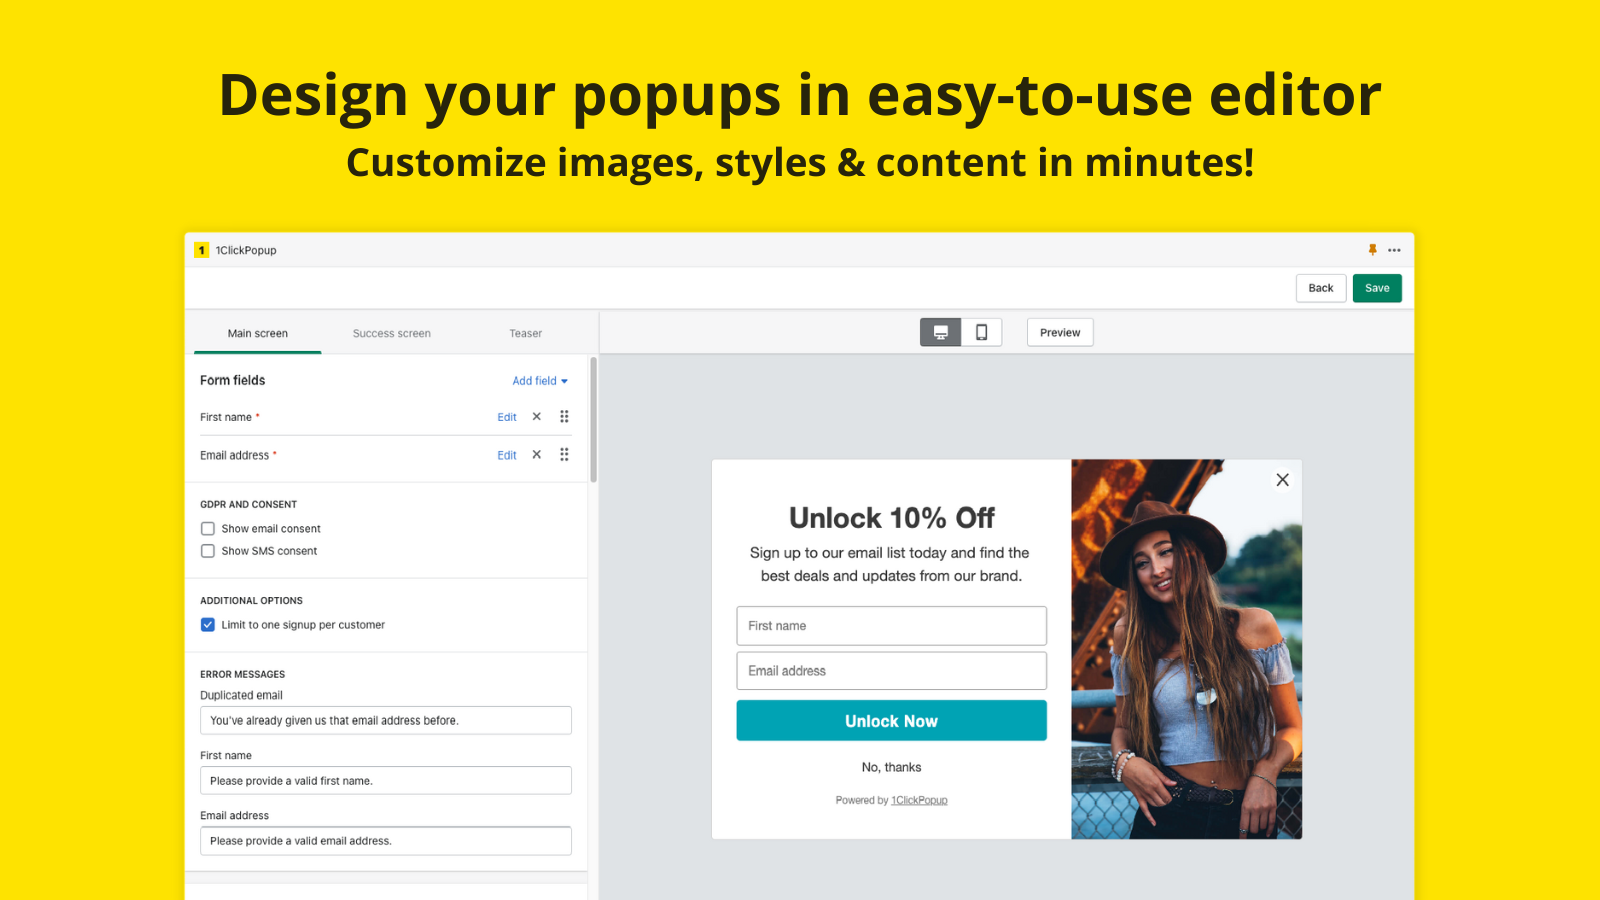 Design your popups in easy-to-use editor